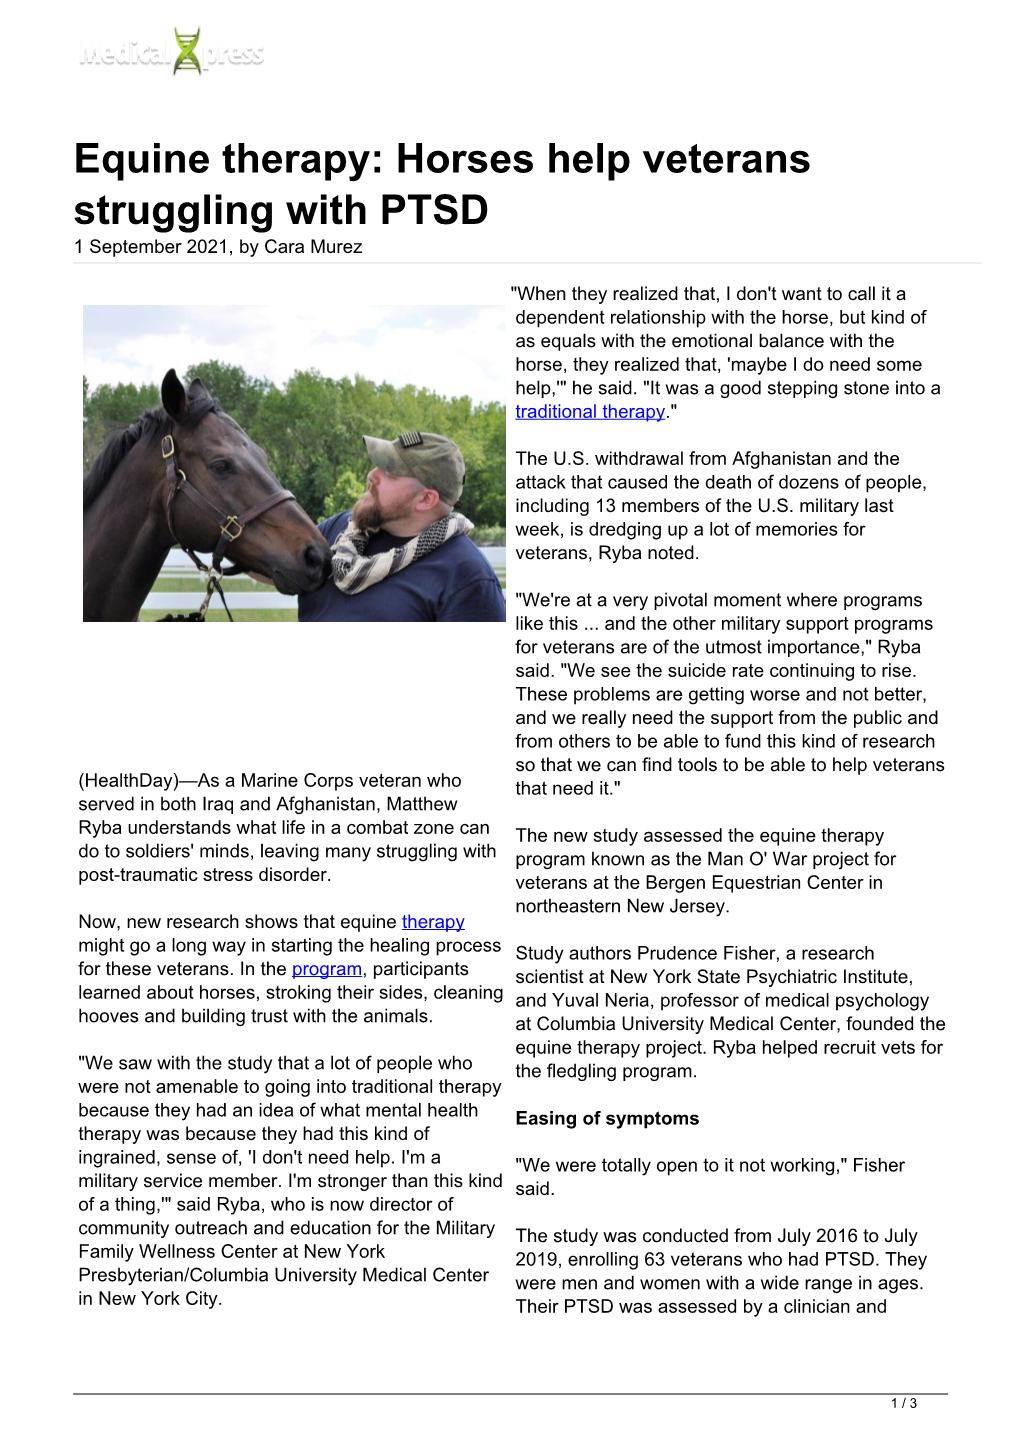 Equine Therapy: Horses Help Veterans Struggling with PTSD 1 September 2021, by Cara Murez